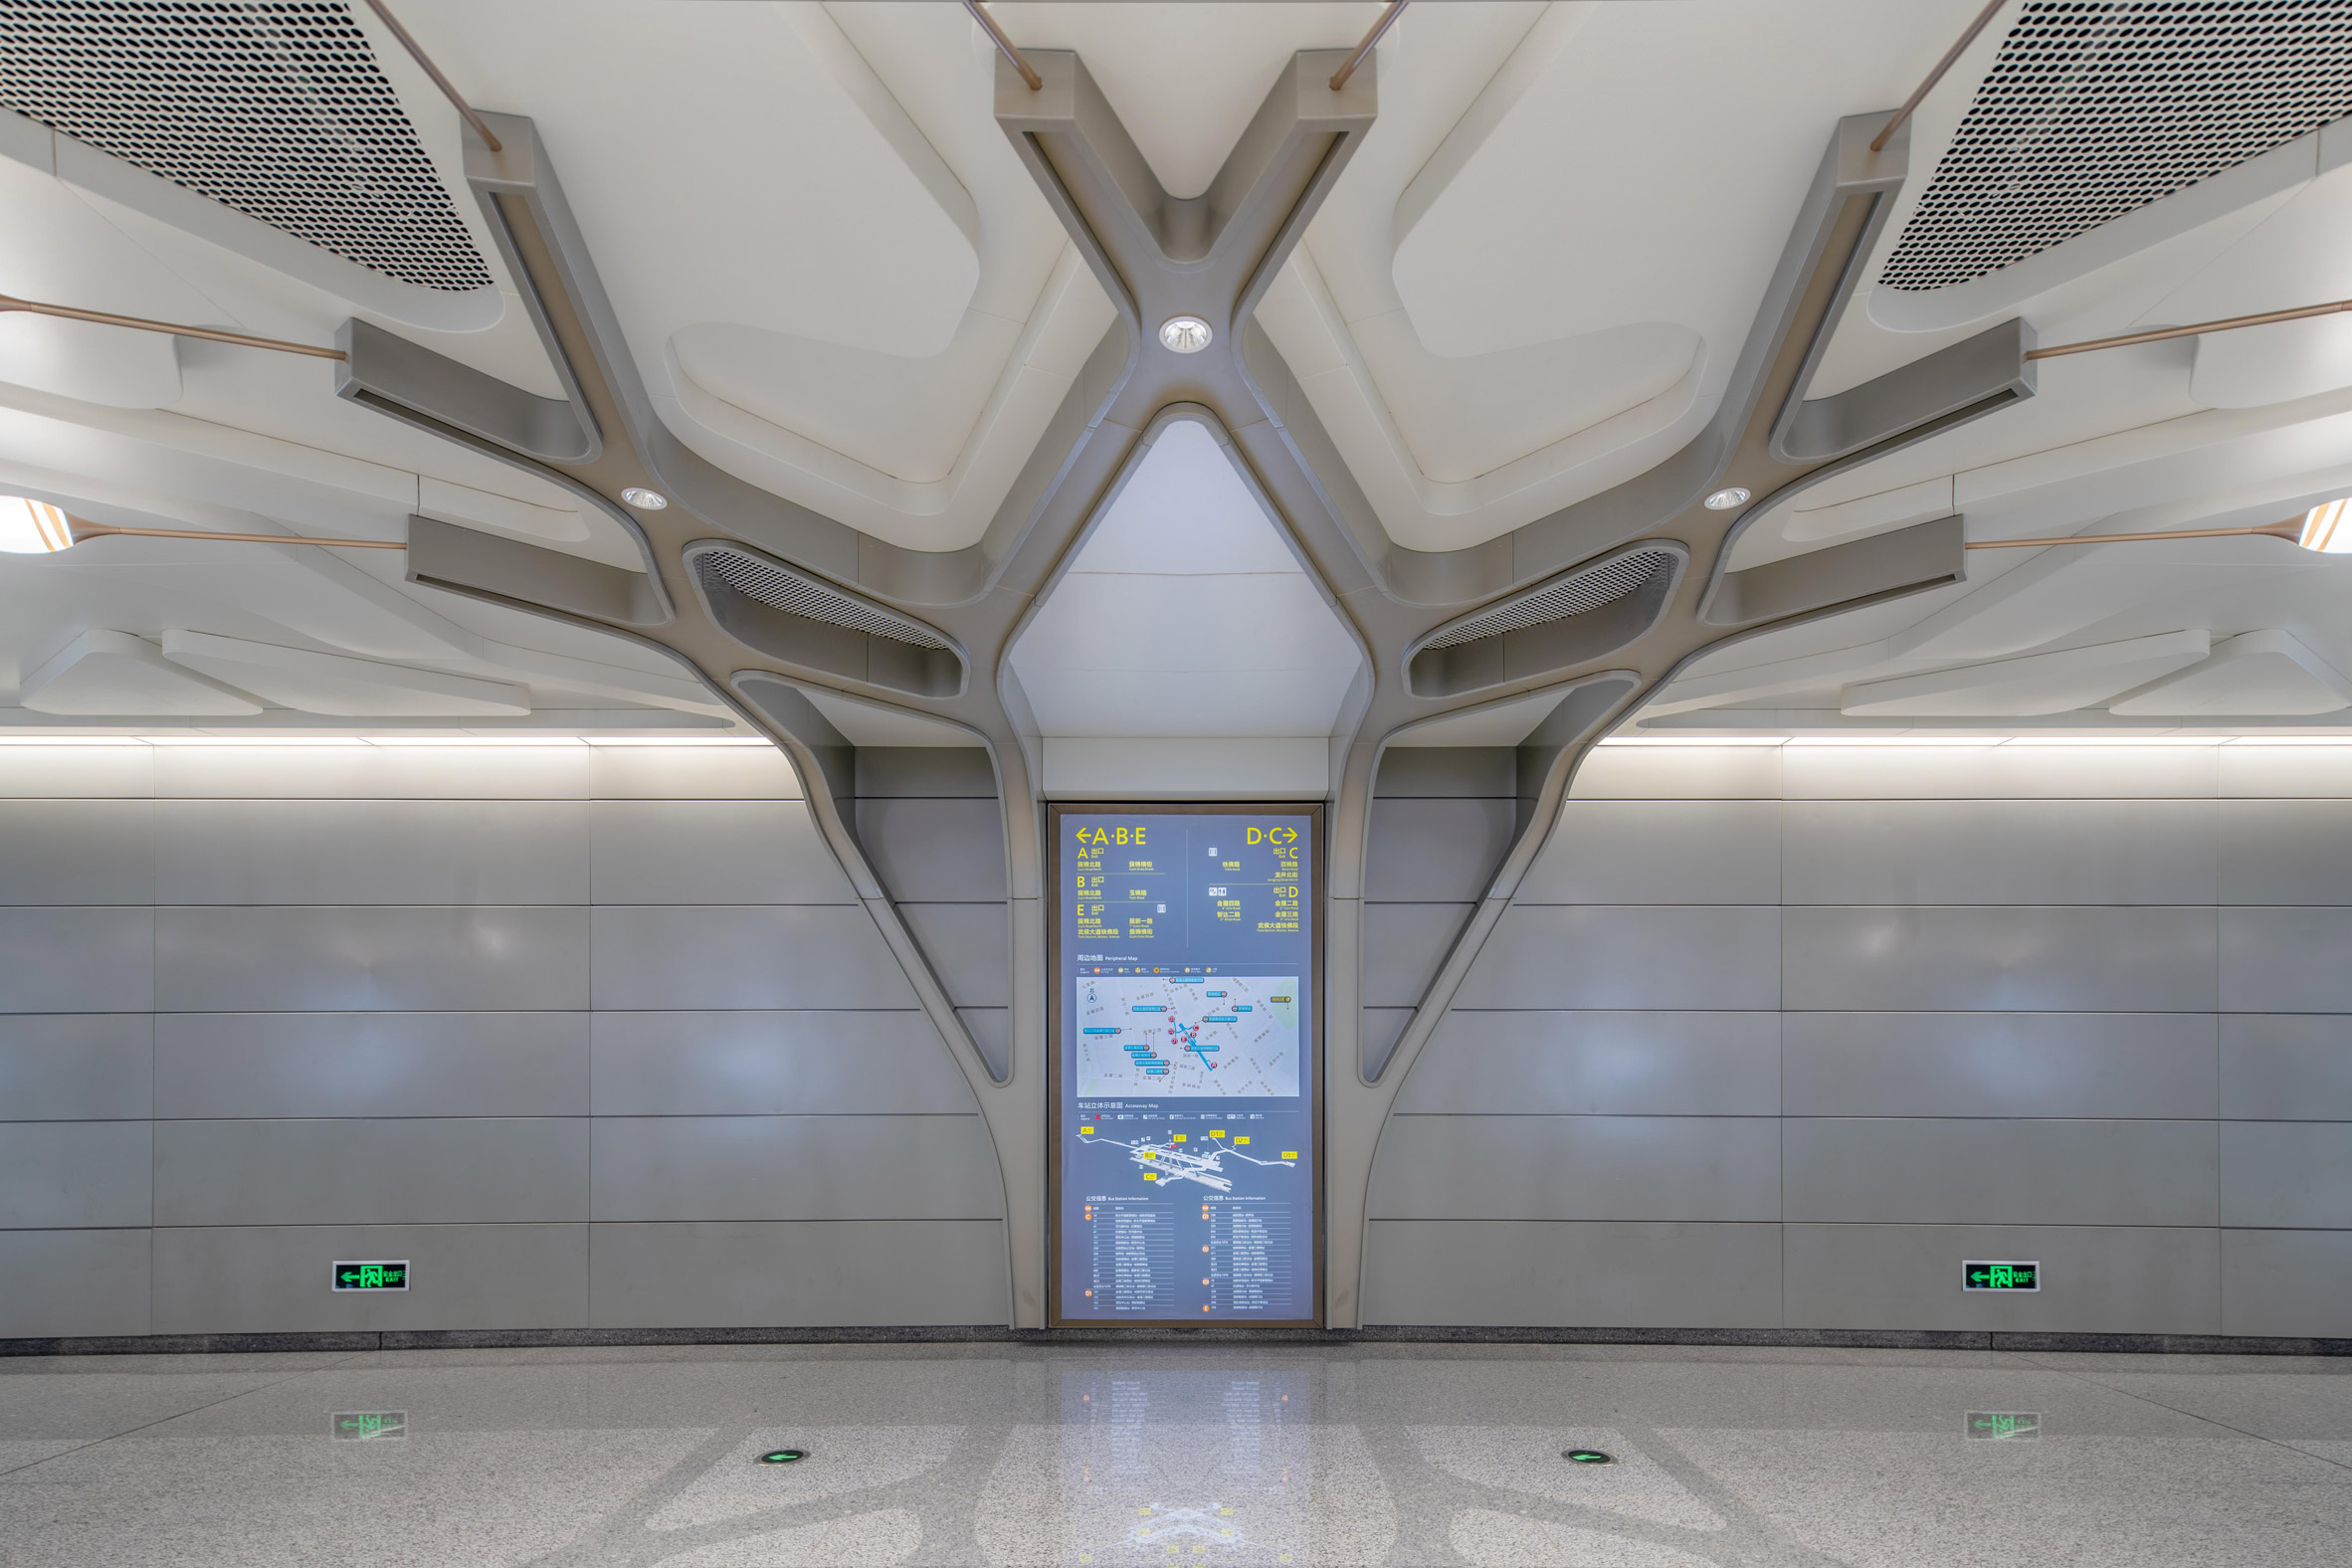 Cuqiao Station designed by J&A and Sepanta Design for Chengdu's fully-automated metro line